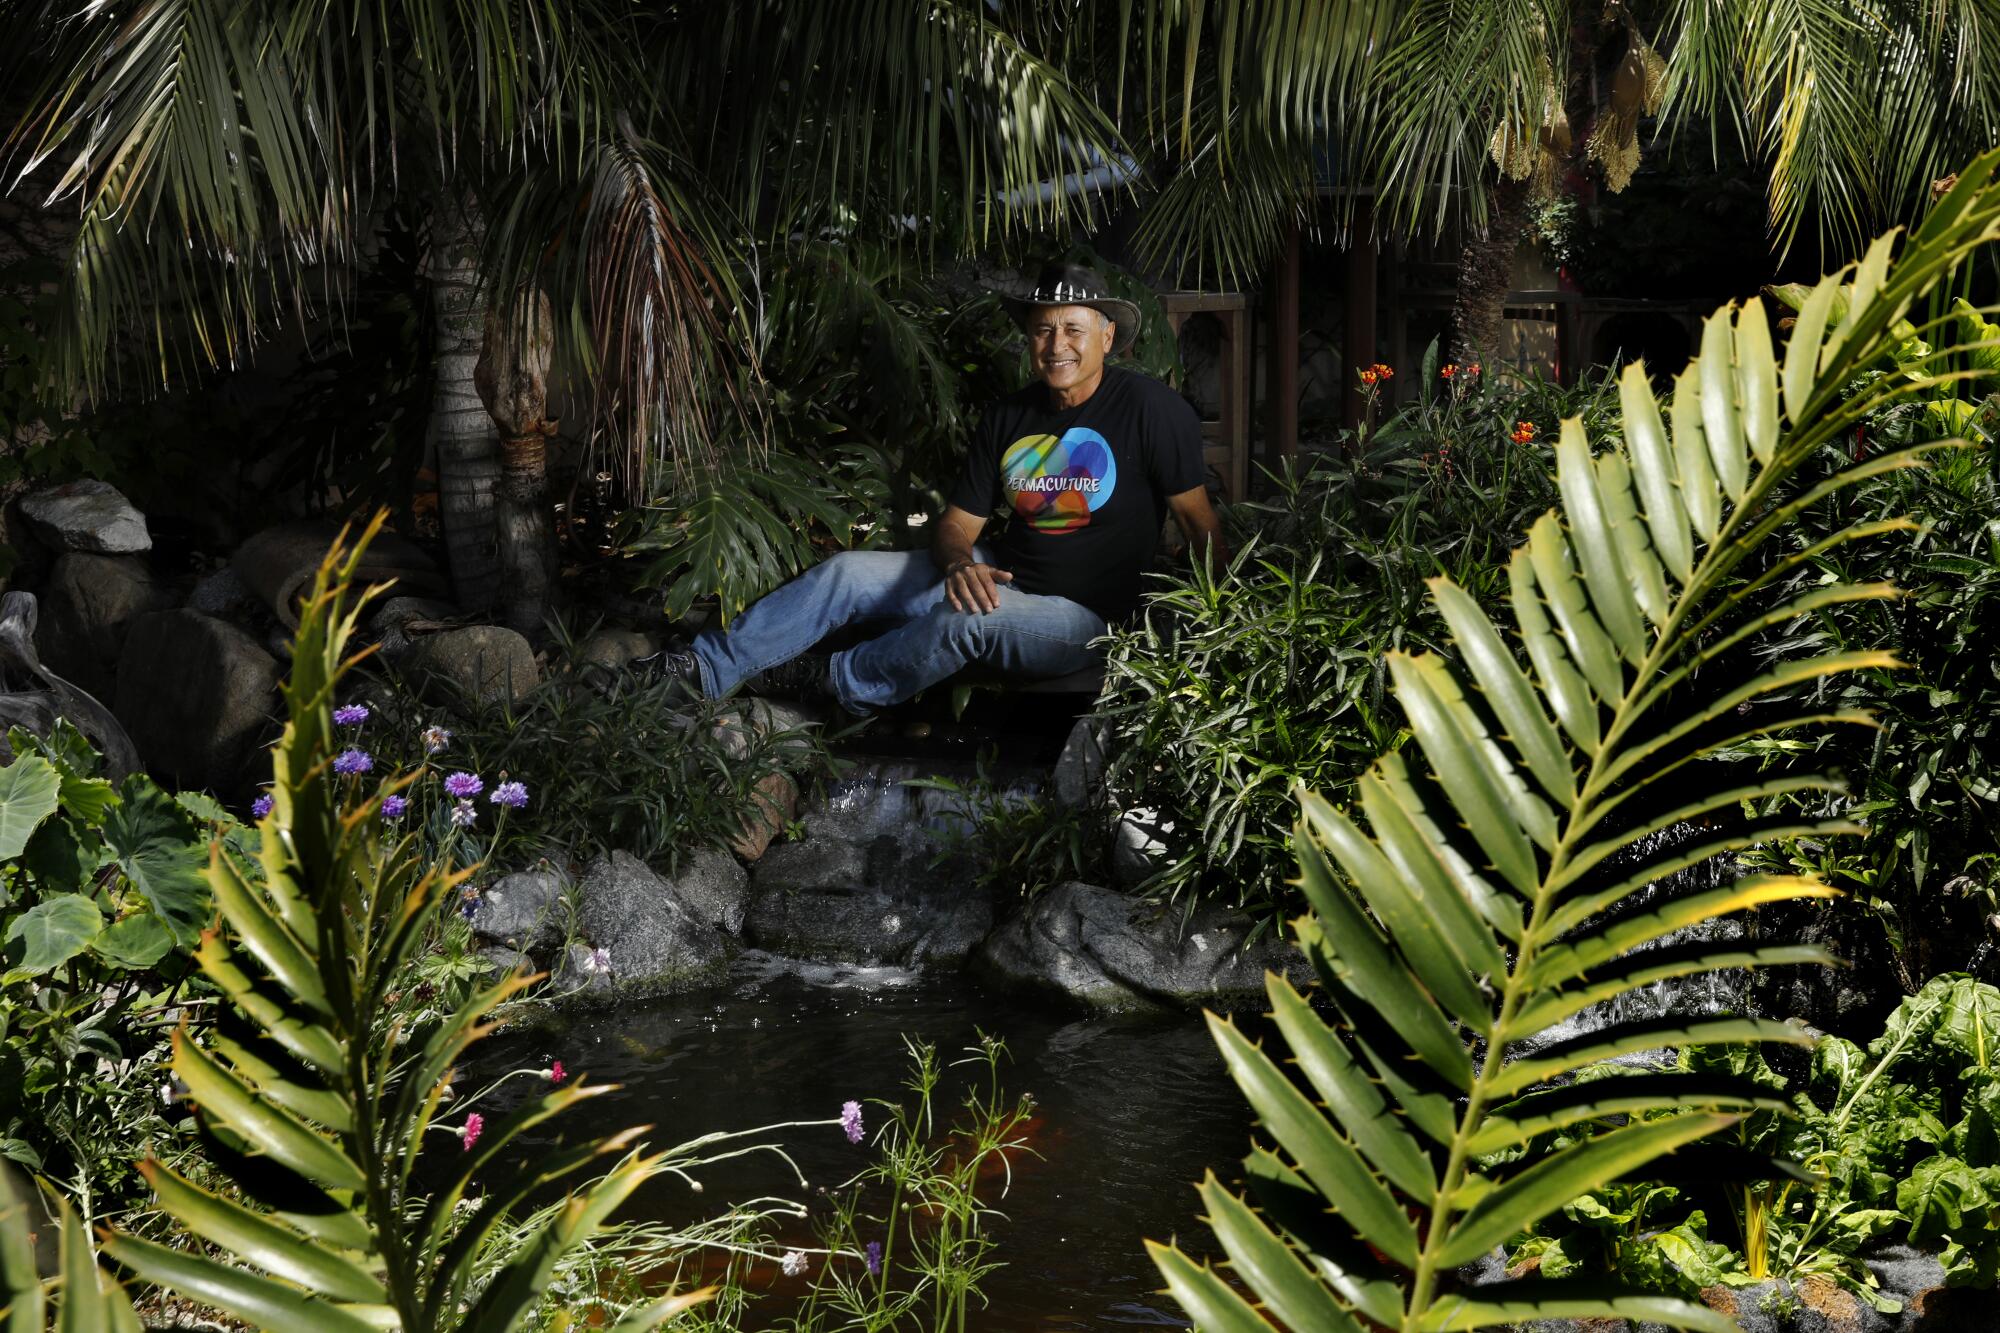 A man sits among plants and trees.